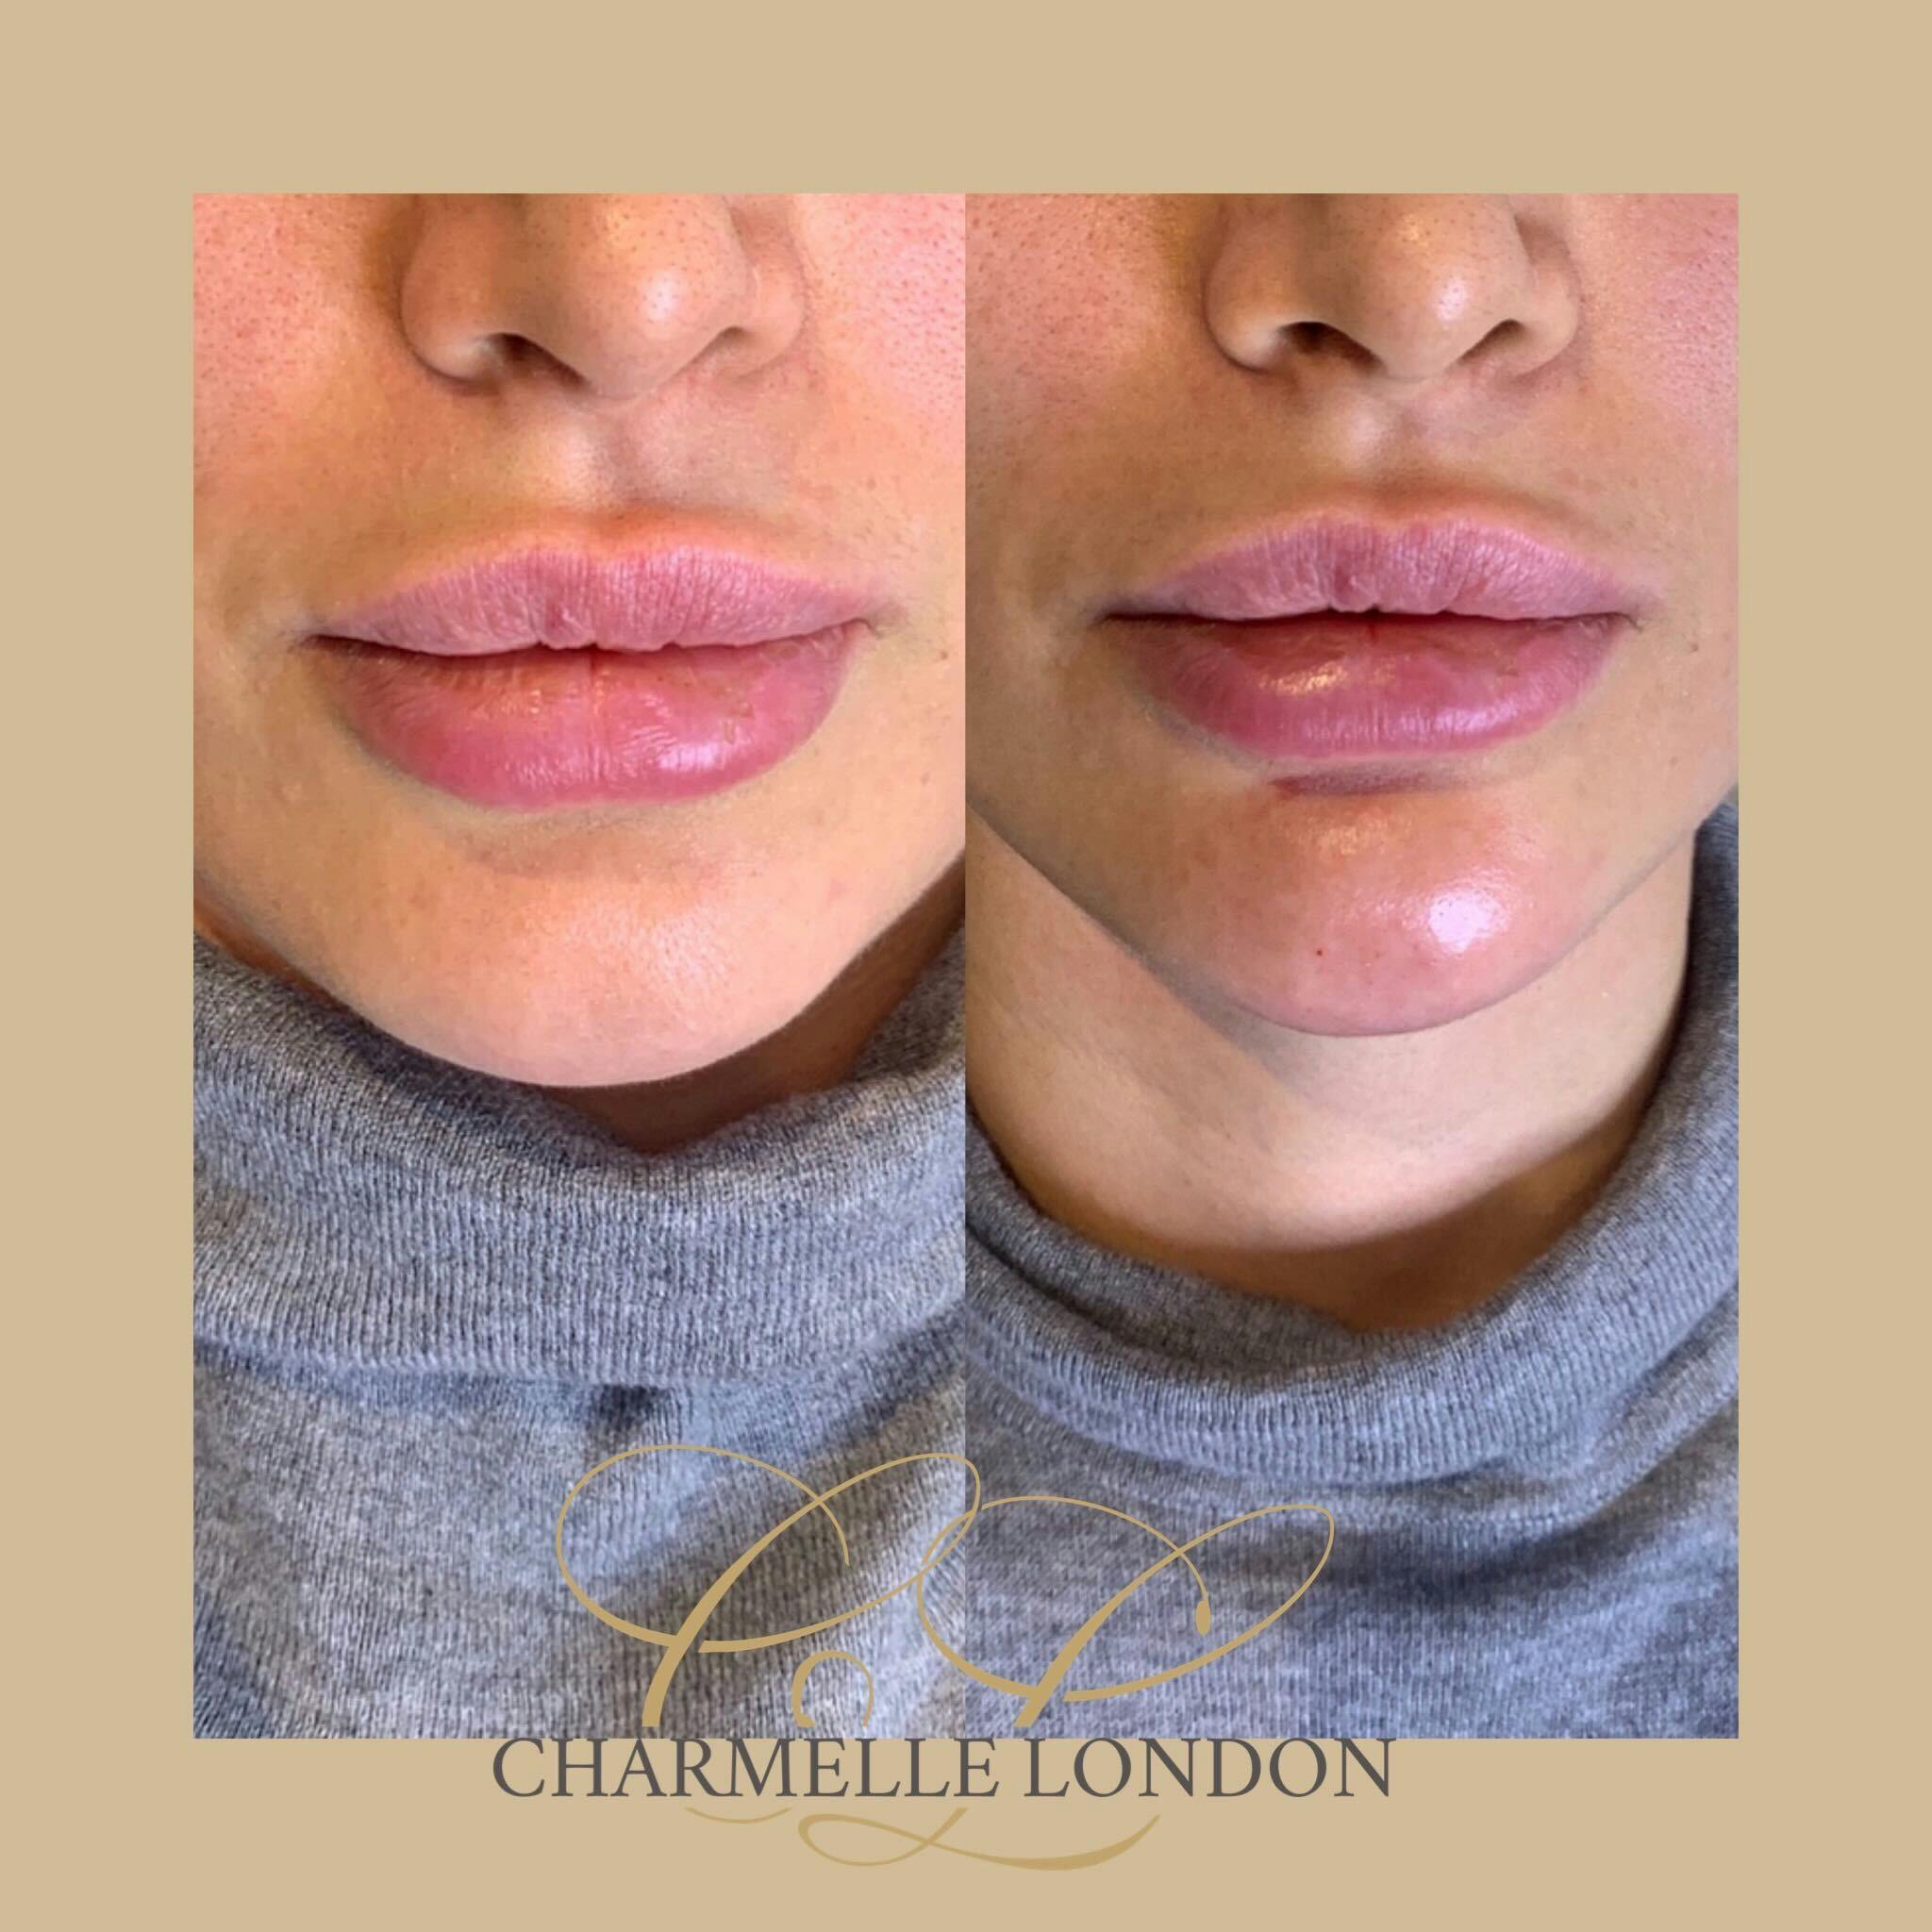 Dermal fillers work by re-shaping the chin and surrounding areas to achieve better shape, proportions and definition. As with all our treatments at the Charmelle London clinic, we aim for a natural and subtle result that suits the proportions of your face.